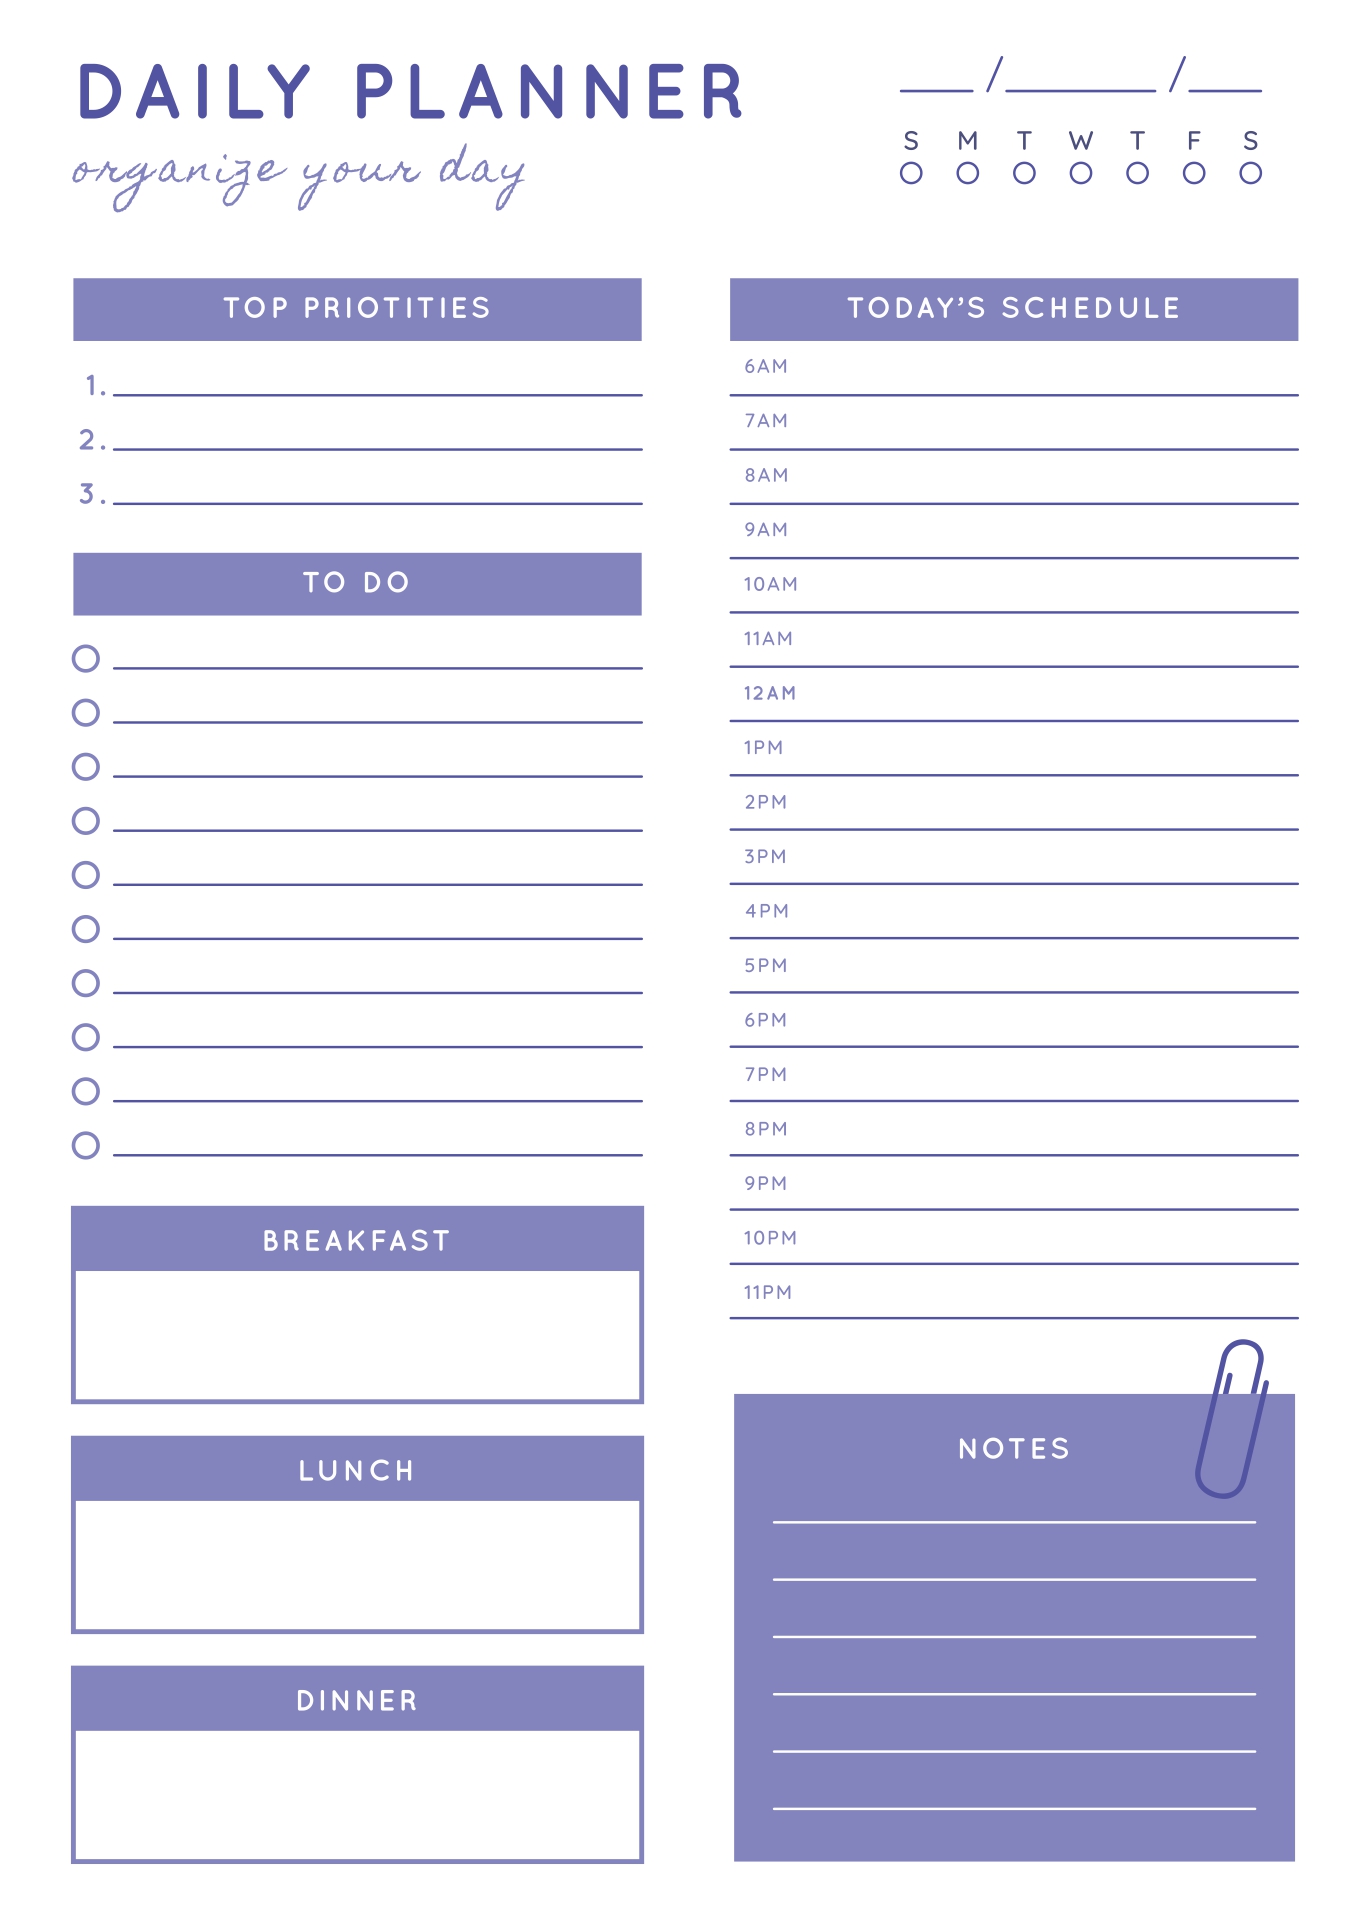 daily schedules for kids printable